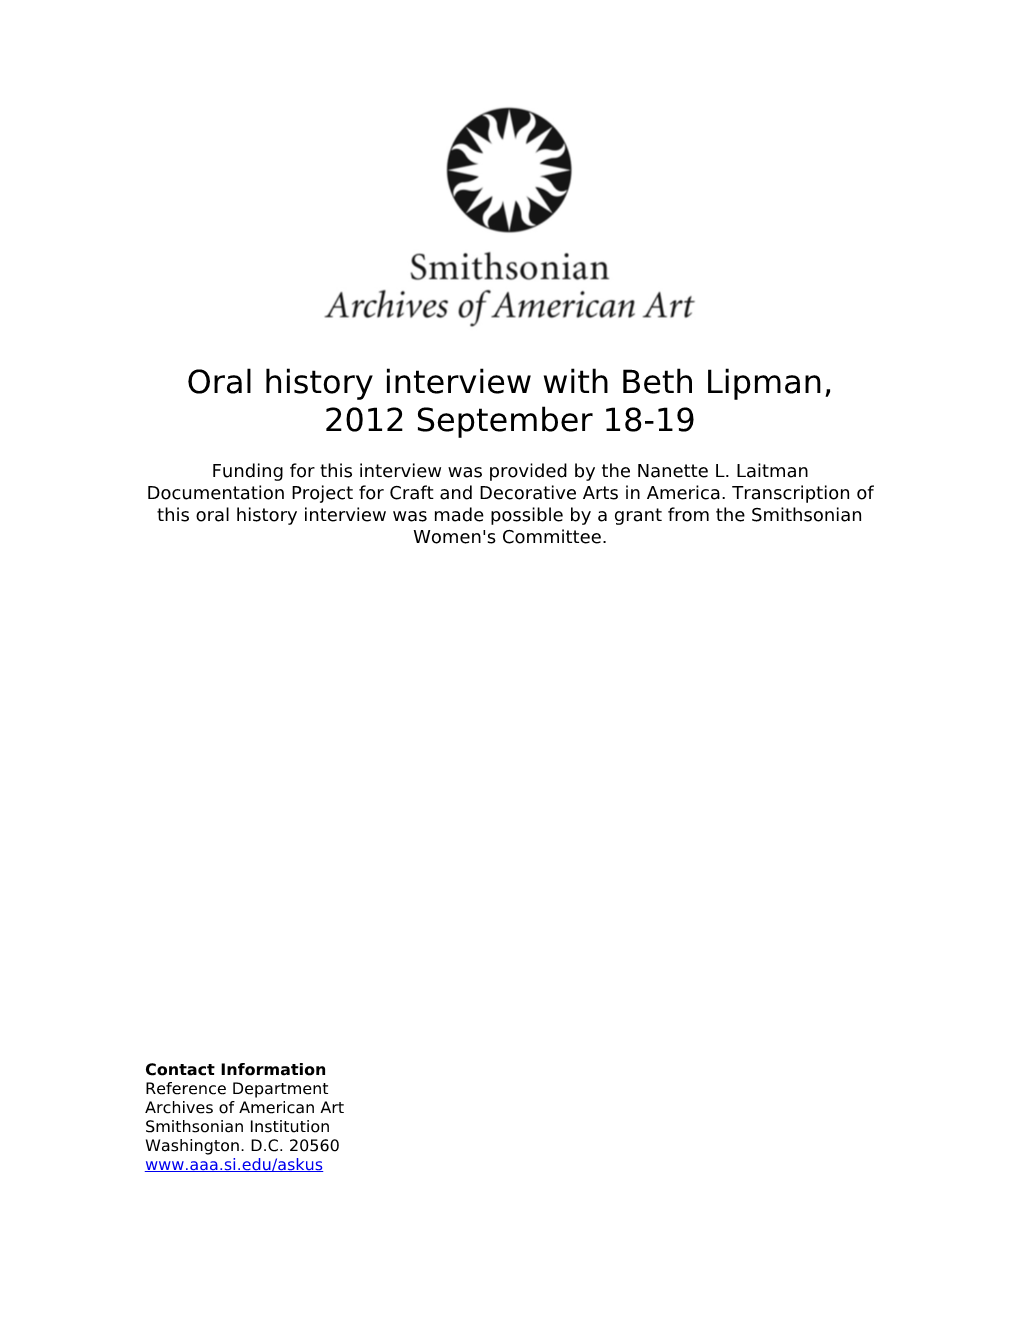 Oral History Interview with Beth Lipman, 2012 September 18-19